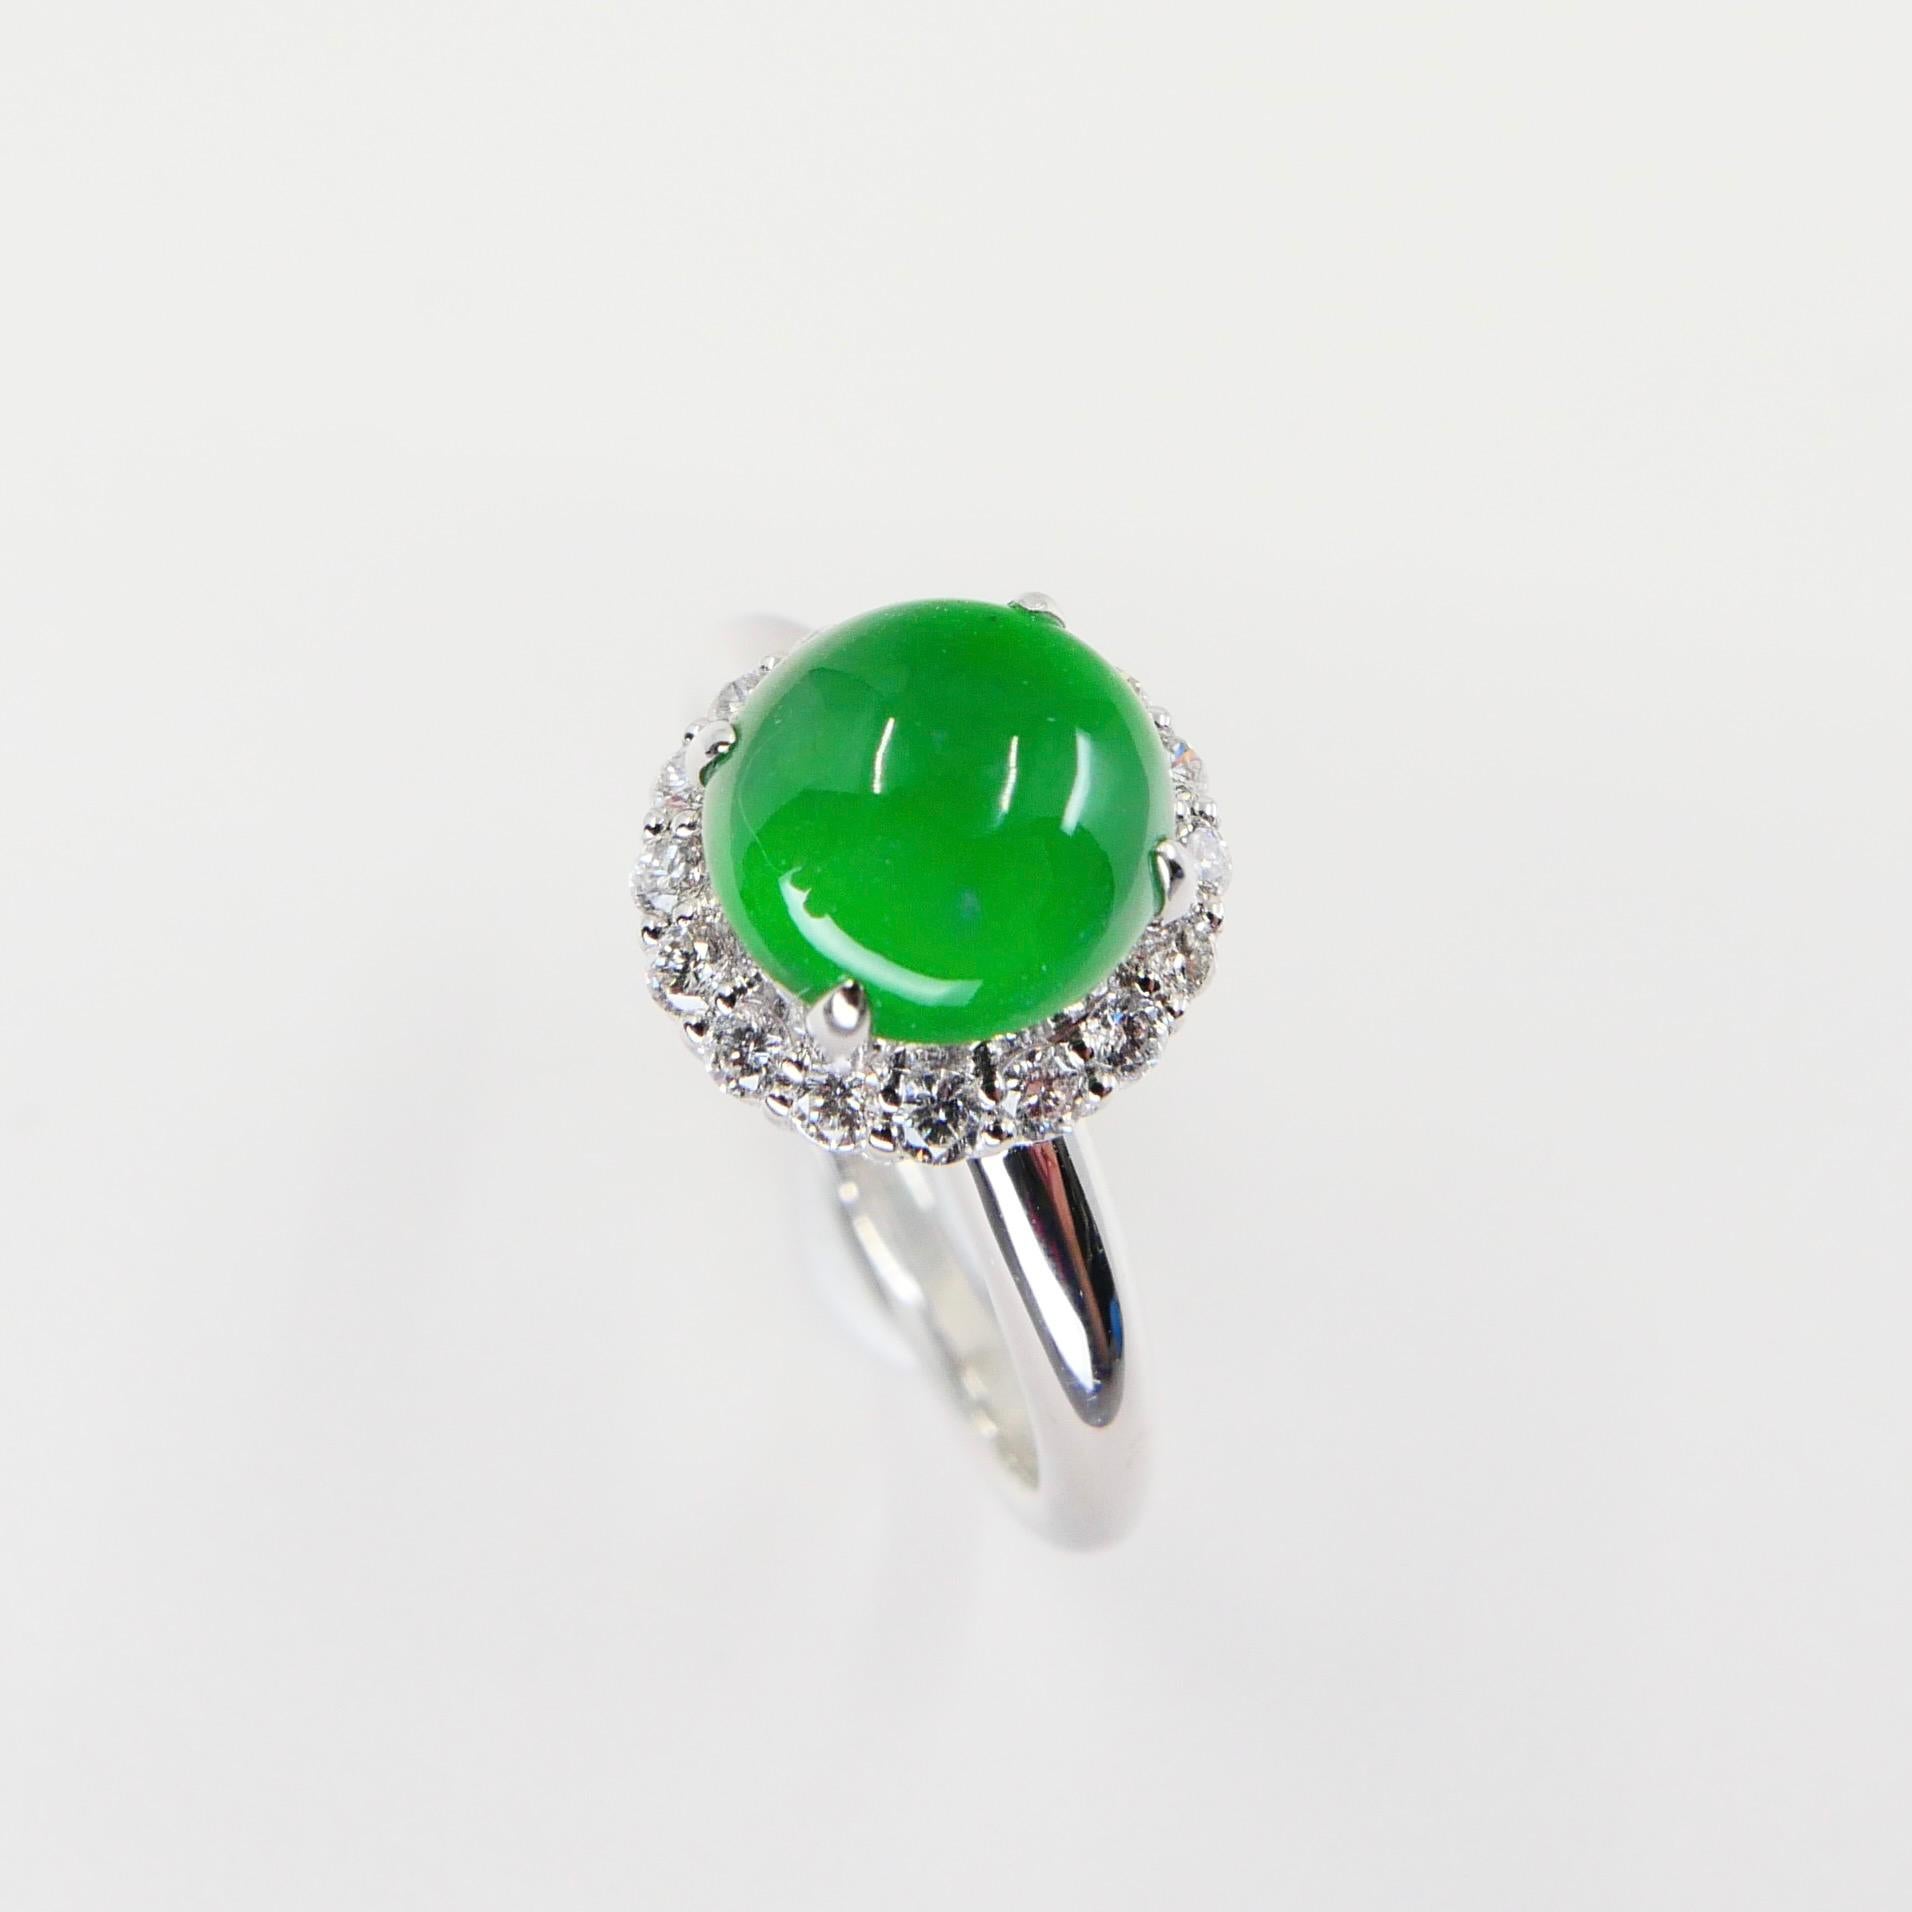 Certified Type A Icy Apple Green Jadeite Jade and Diamond Ring, Super Glow For Sale 1